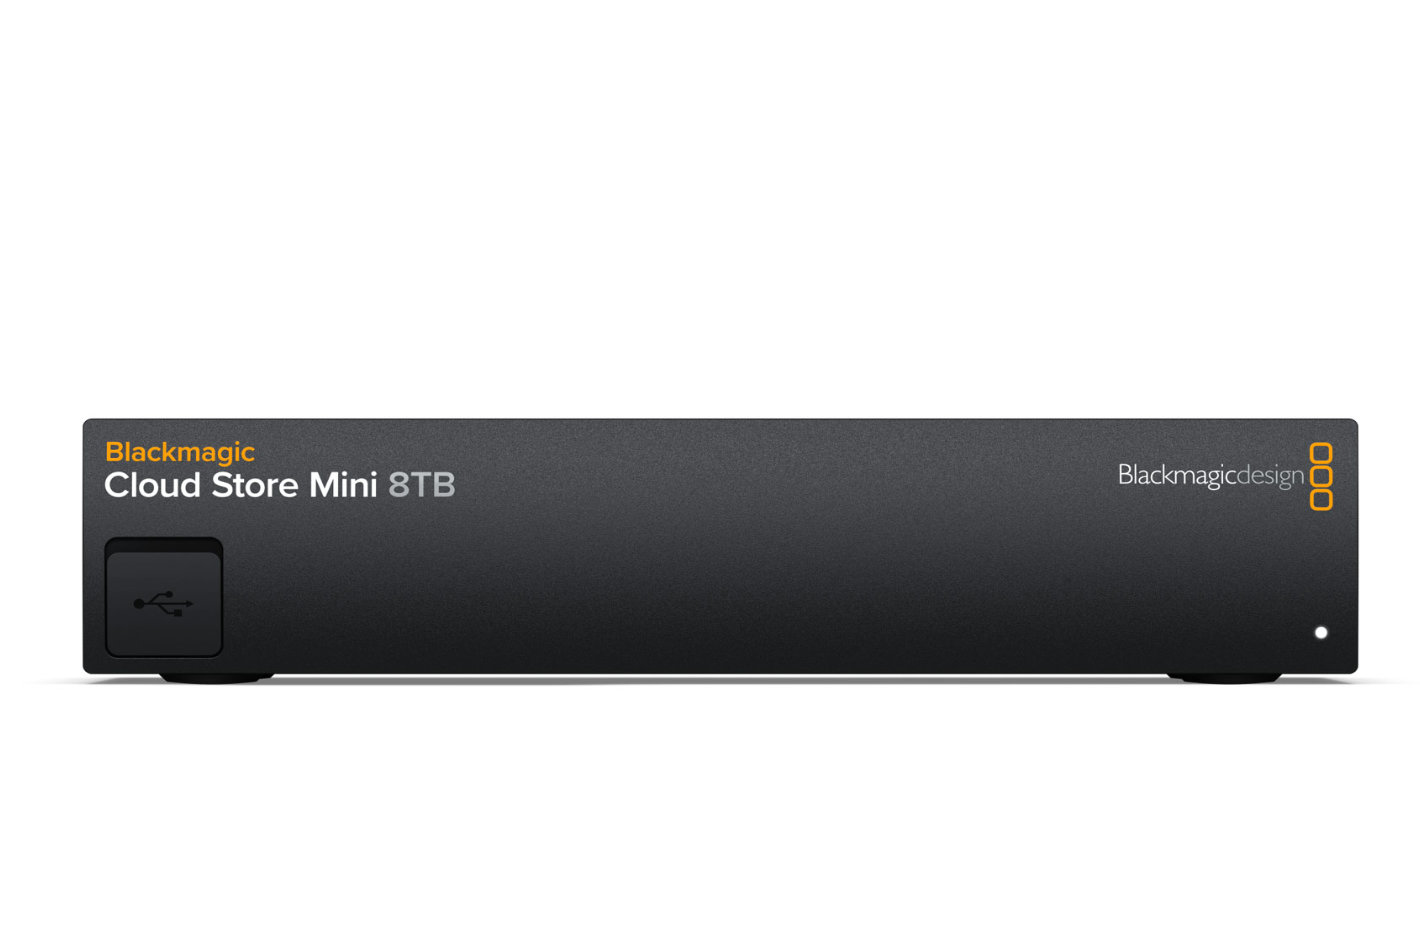 Blackmagic Cloud Store models have new lower prices